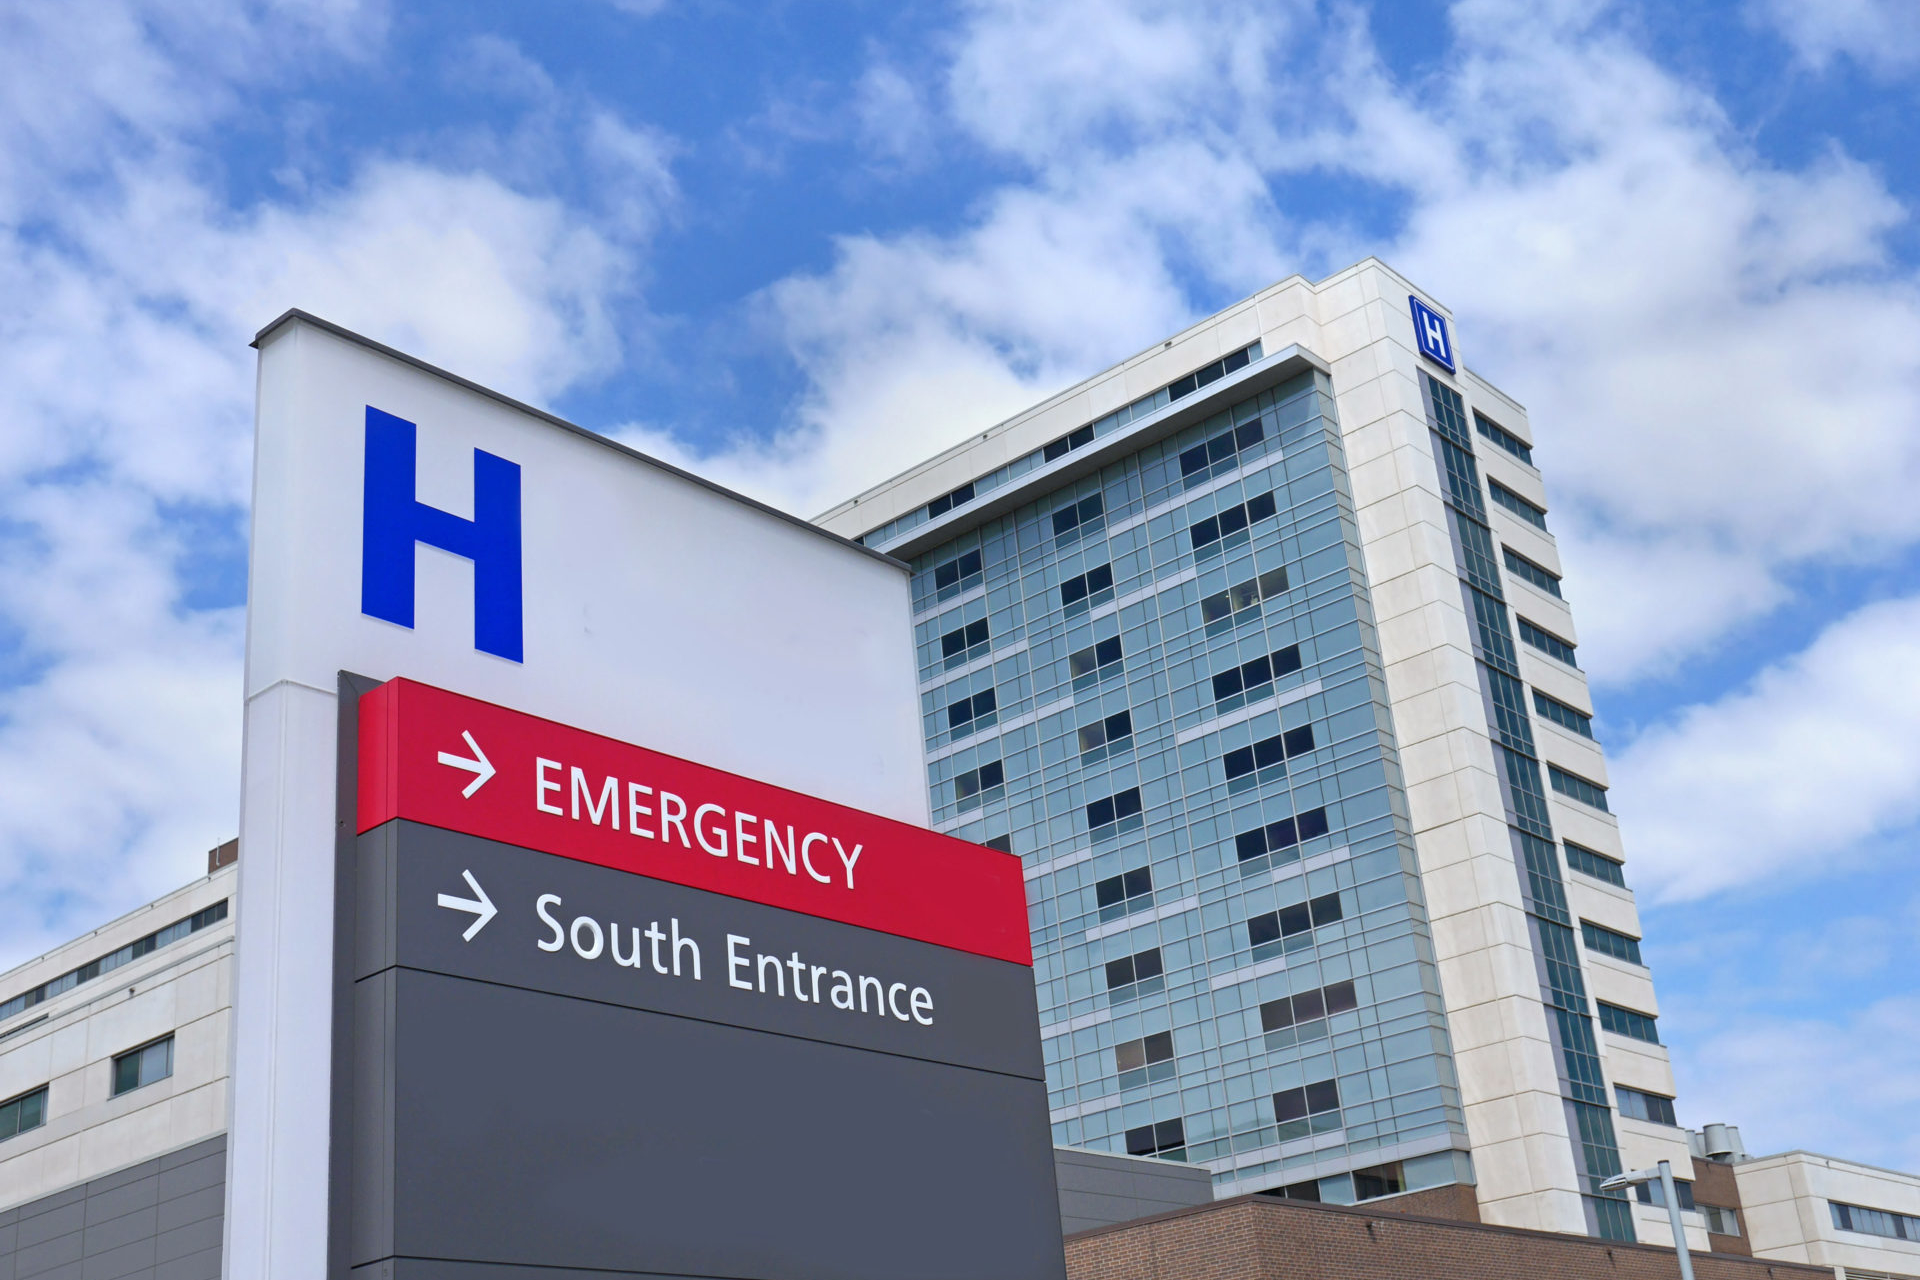 Direction Sign to Hospital